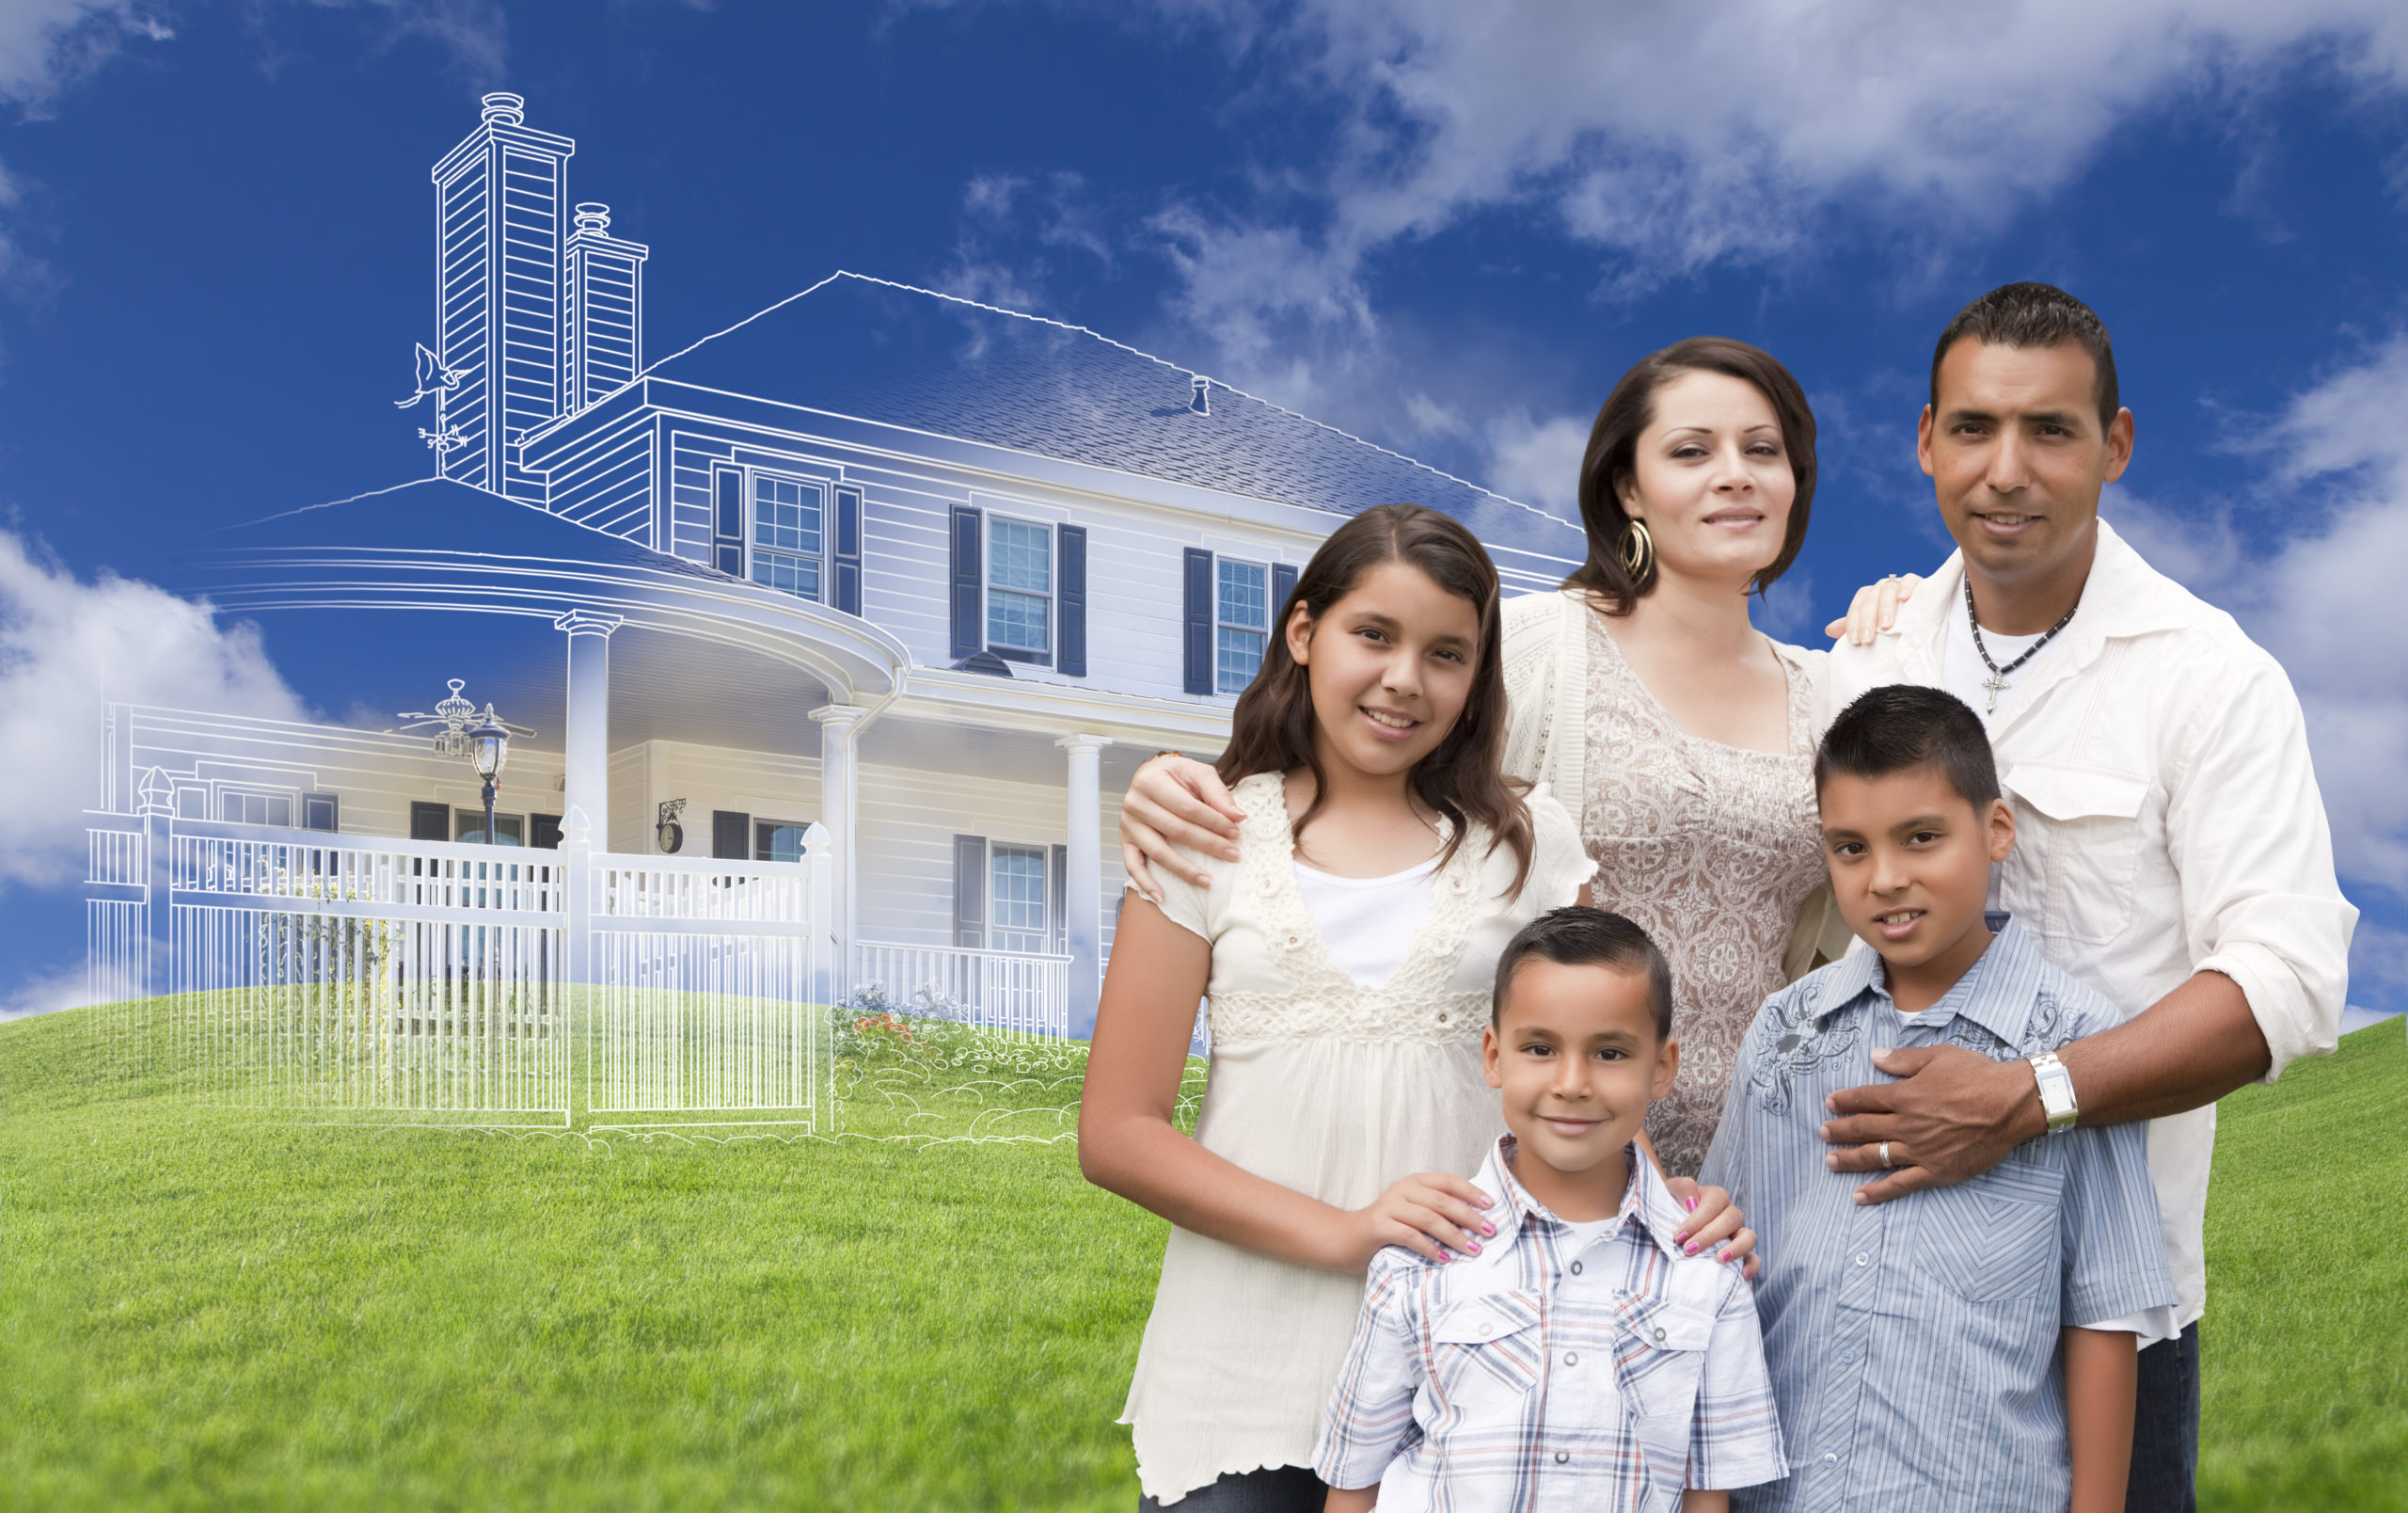 Hispanic Home Ownership Is and Will Continue to Fuel the Home Buying Market